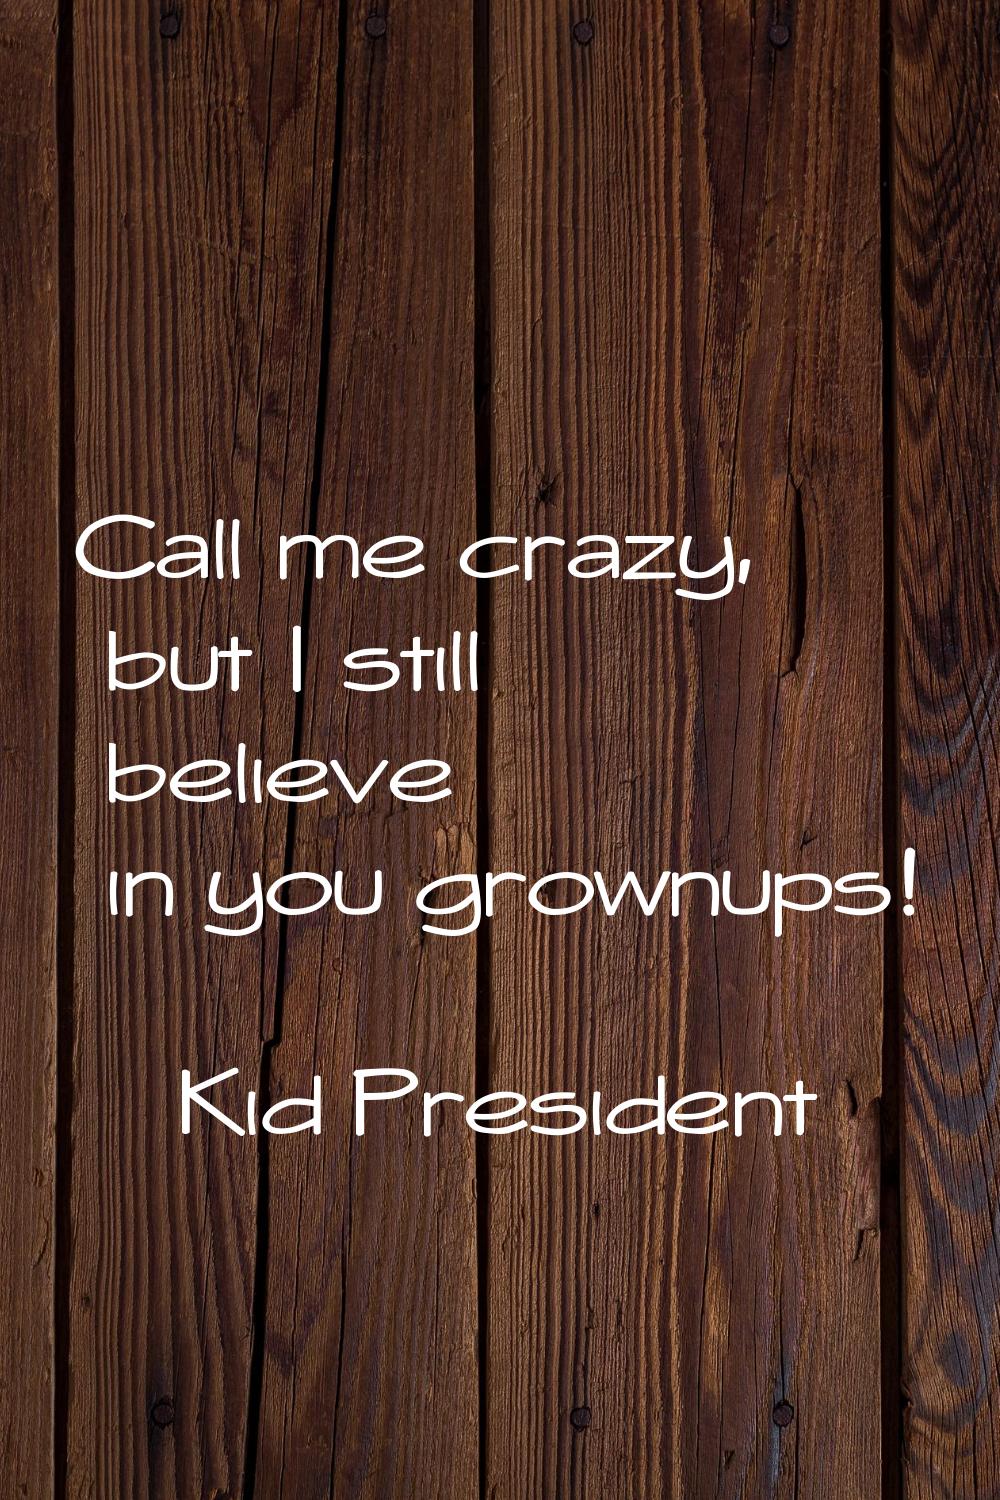 Call me crazy, but I still believe in you grownups!